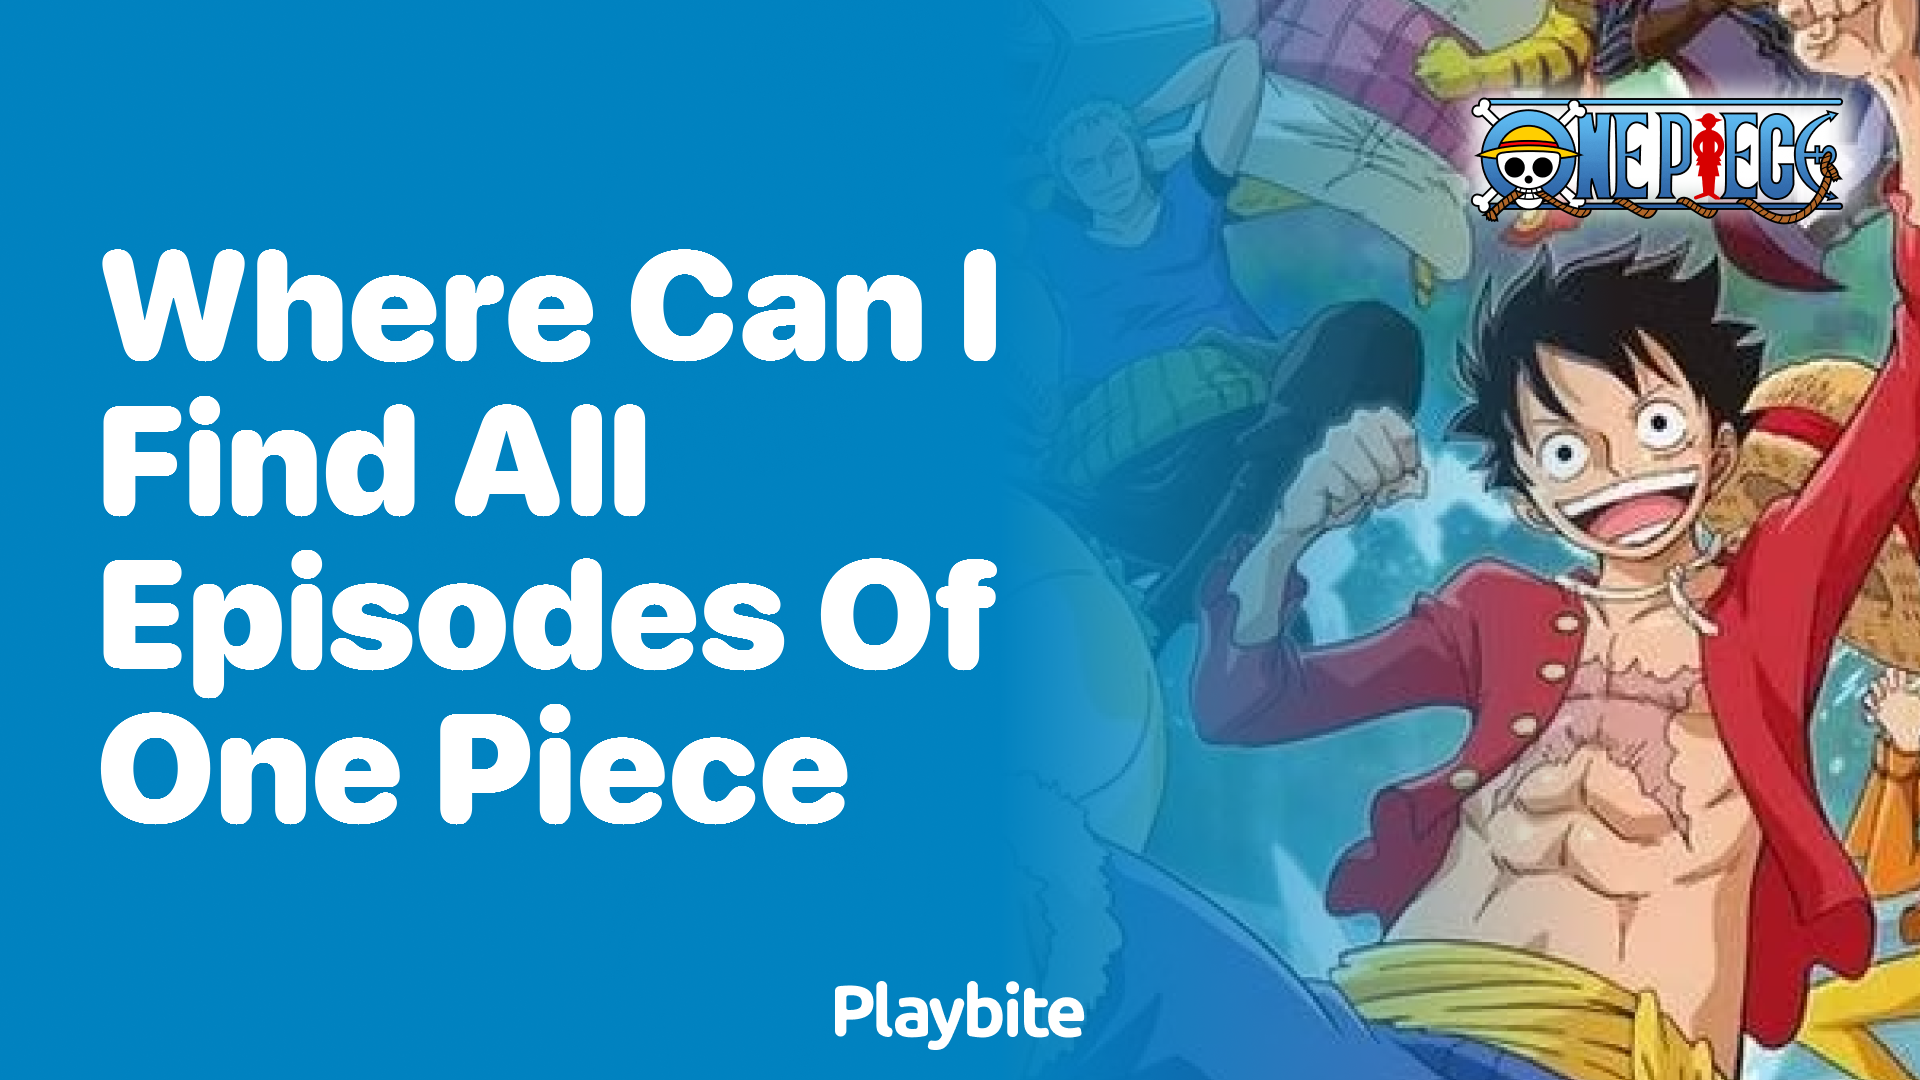 Where can I find all episodes of One Piece?